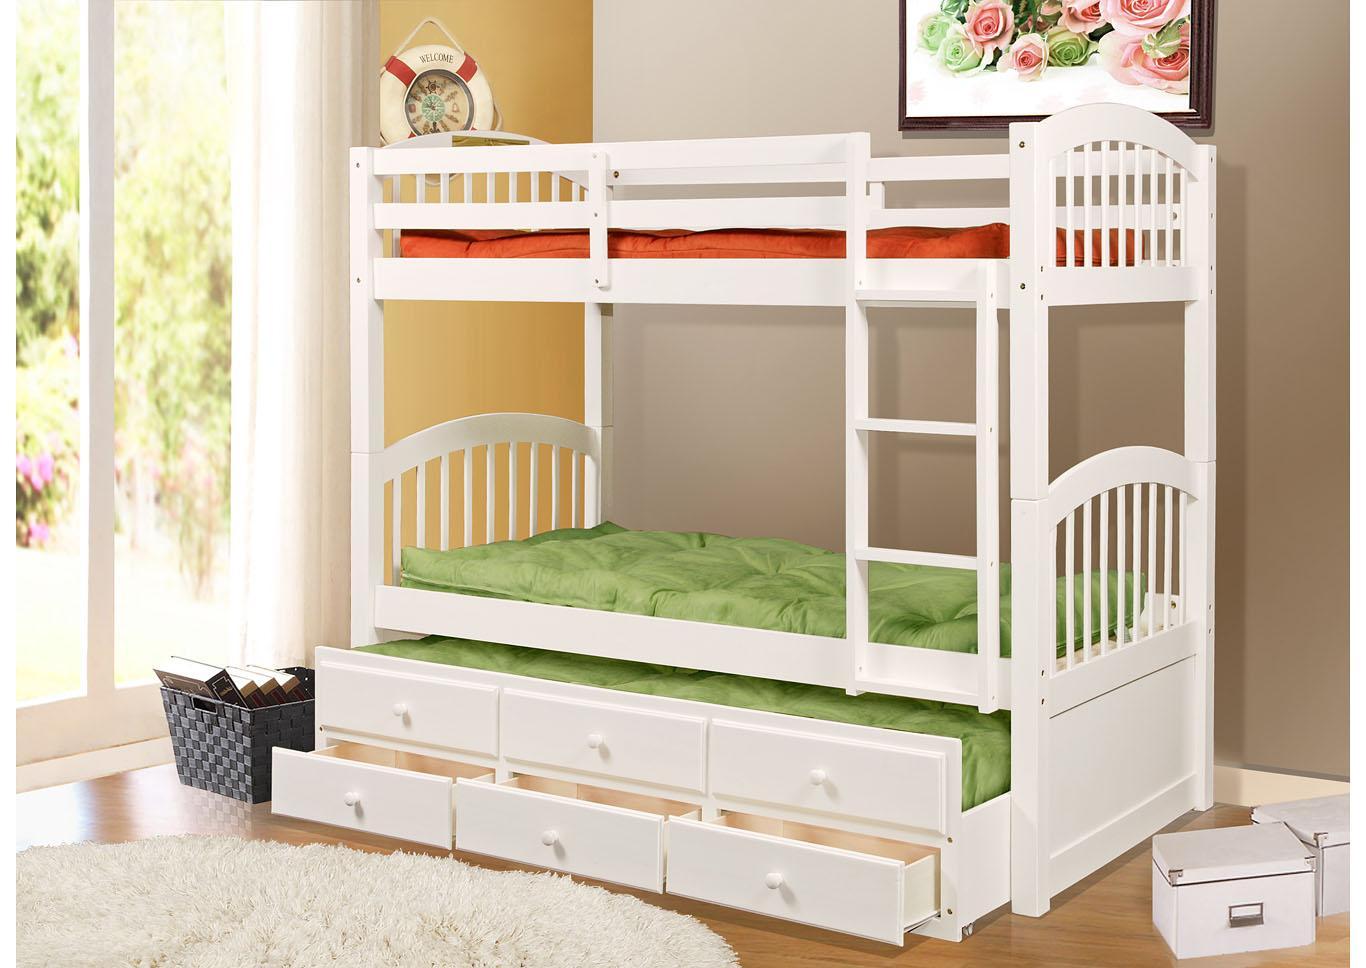 Benny Bunk Bed W Trundle Storage, Bunk Beds With Trundle And Storage